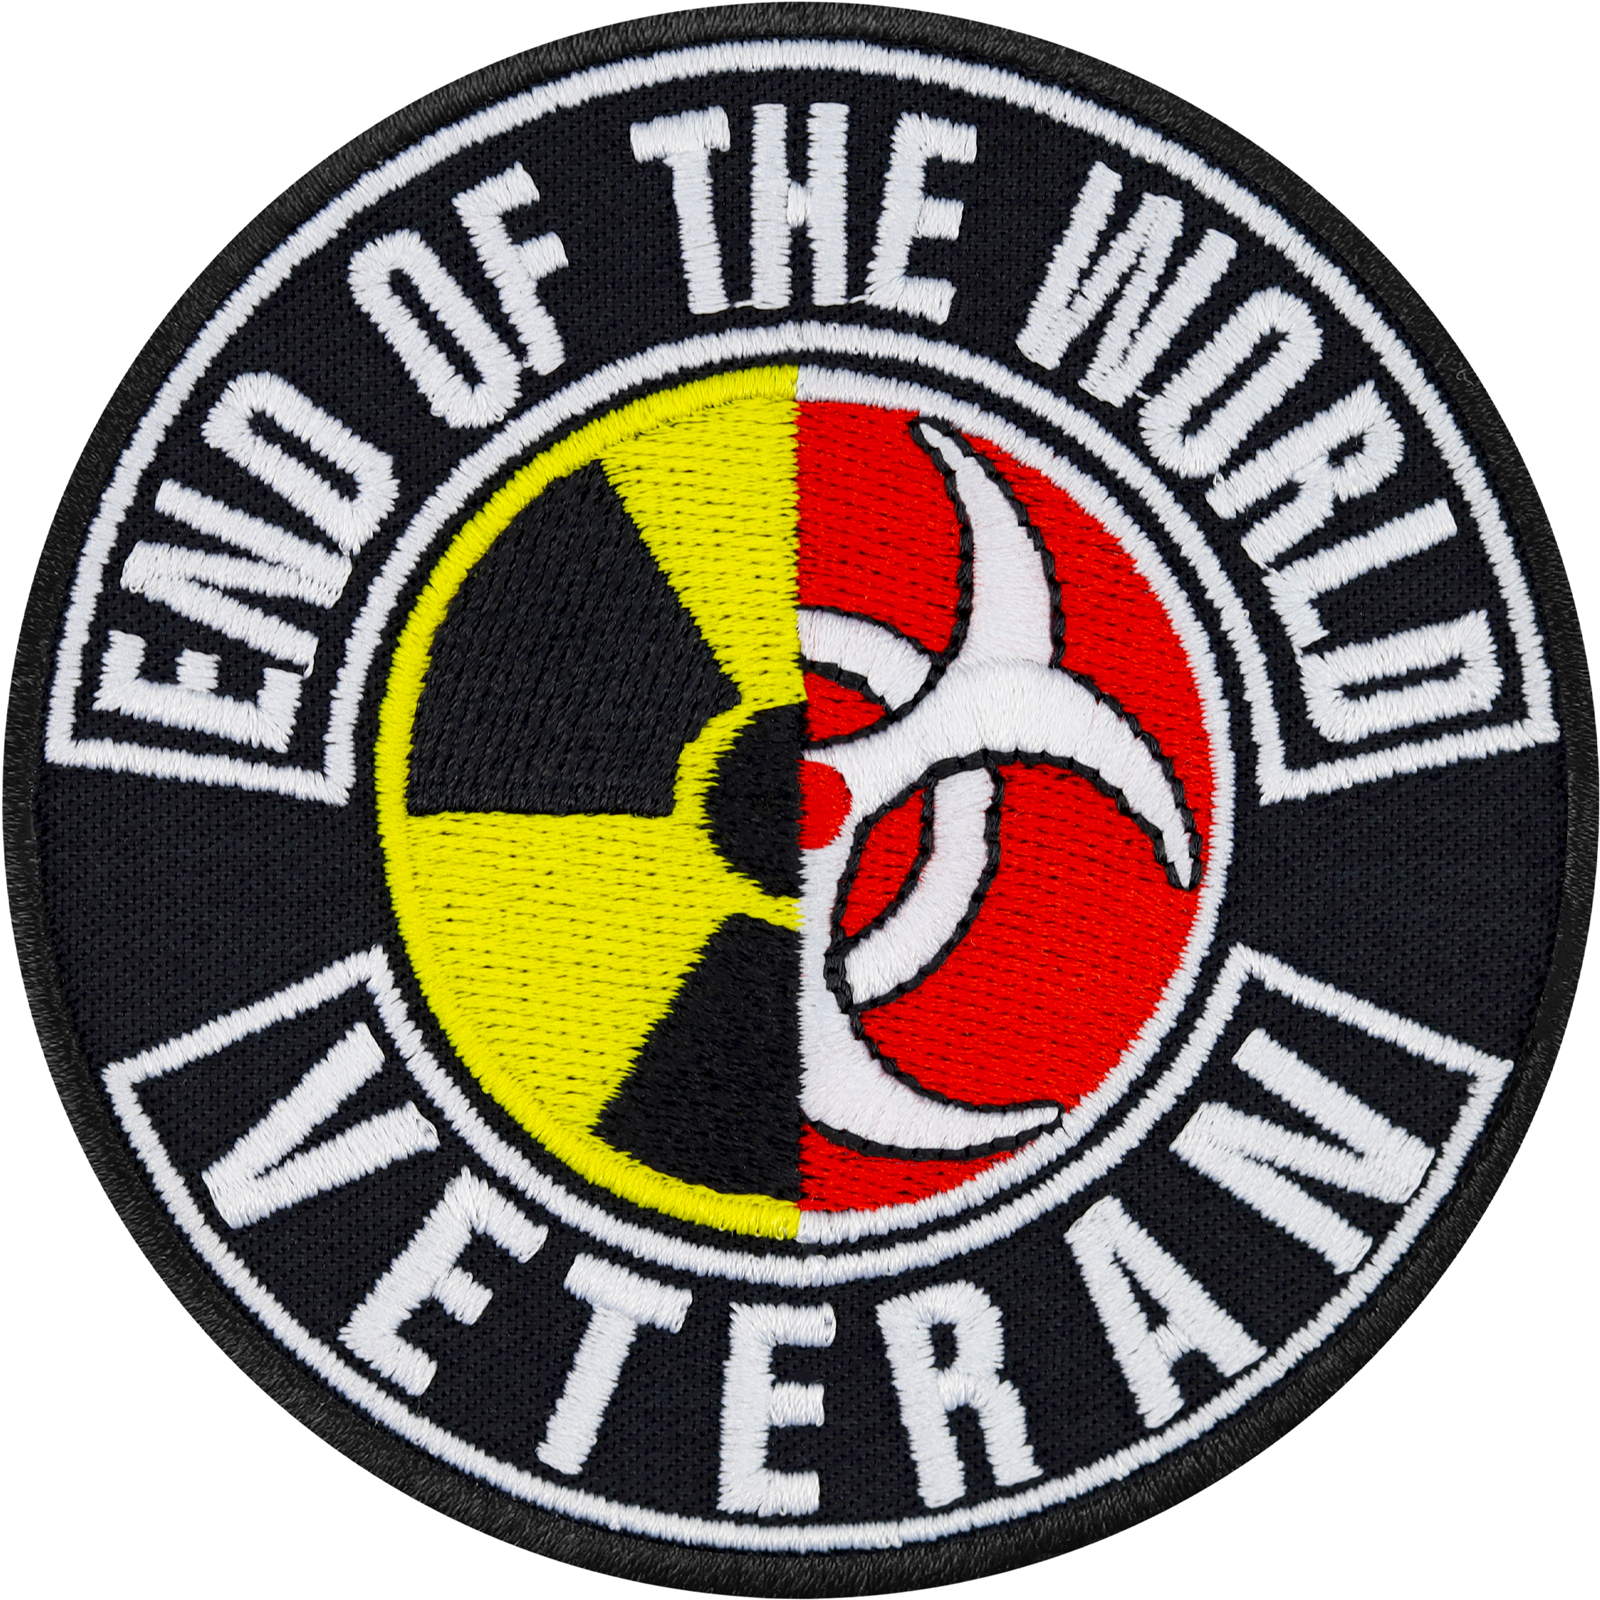 End of the world veteran - Patch